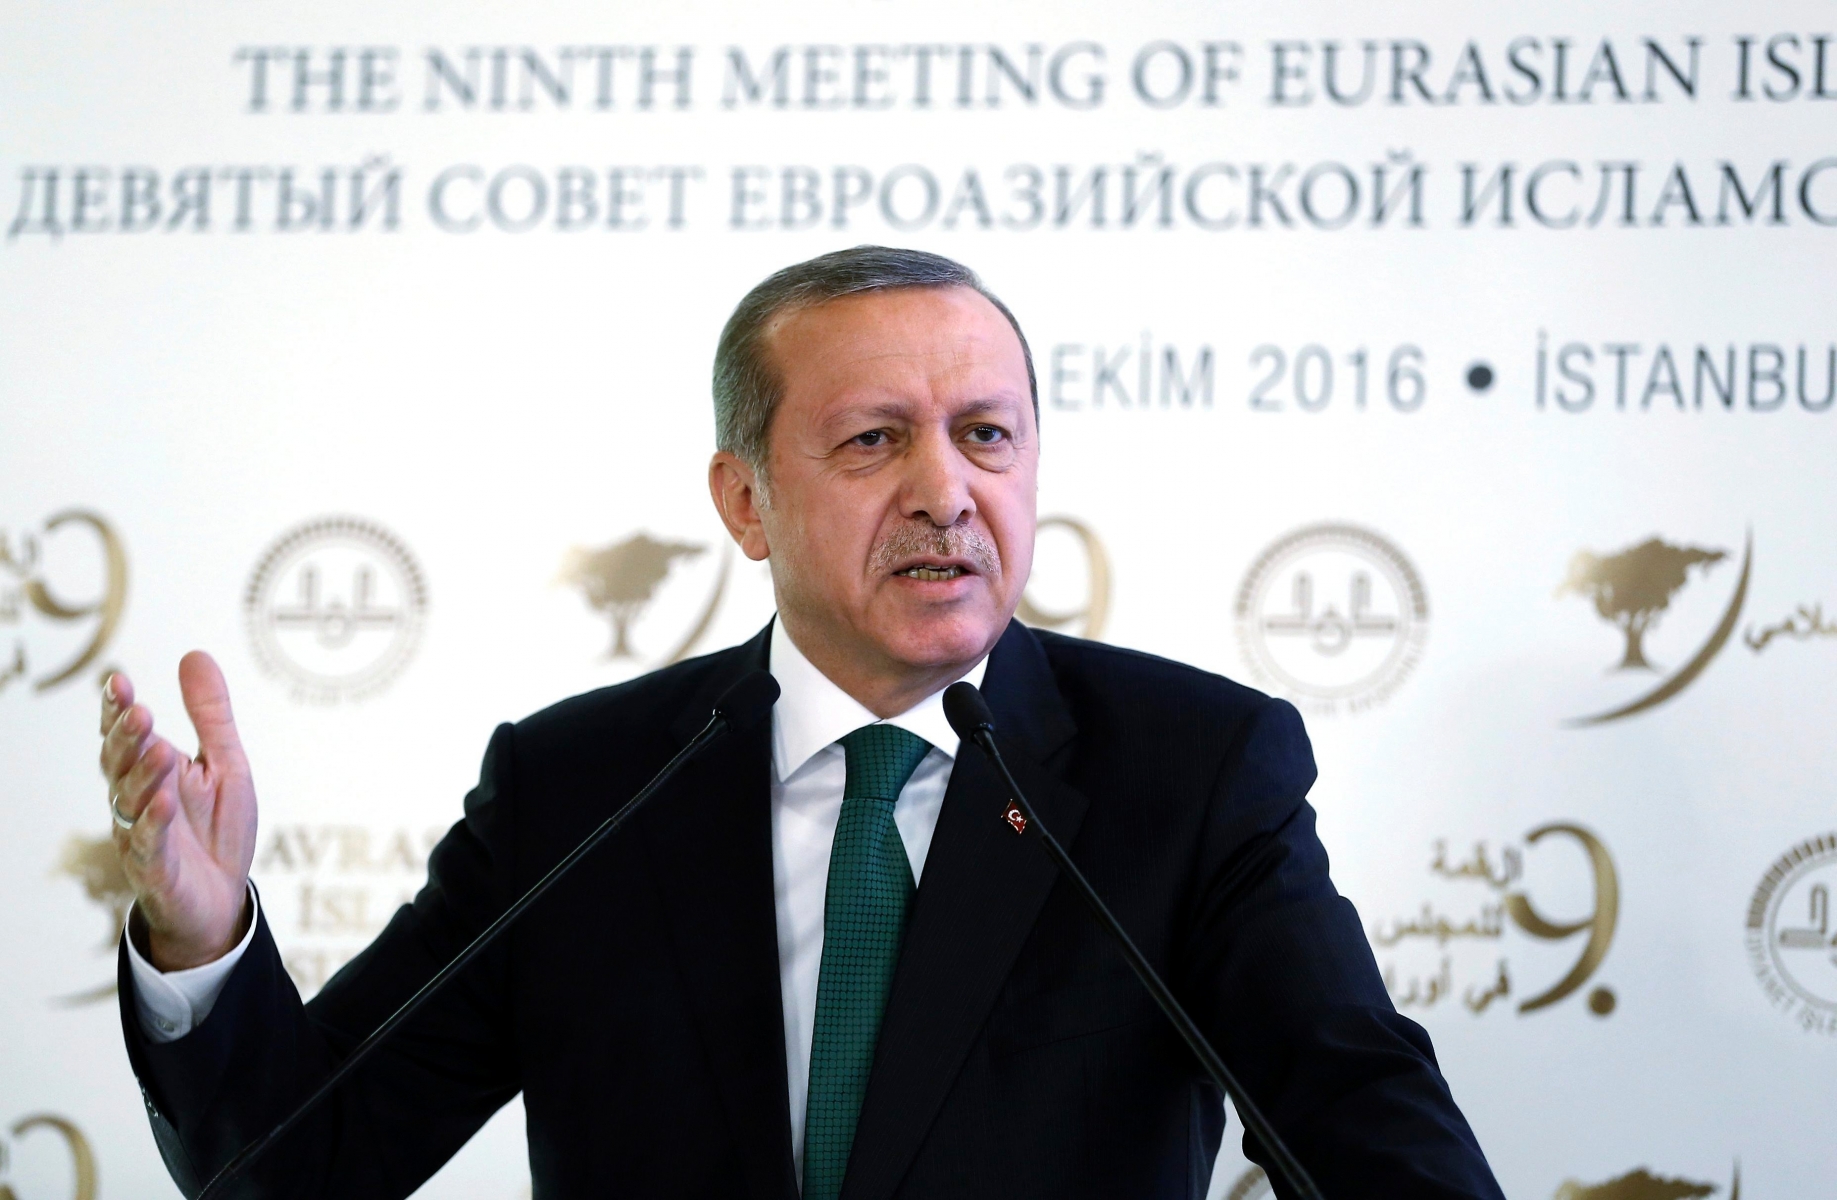 Turkish President Recep Tayyip Erdogan speaks during a meeting on Islam in Eurasia in Istanbul, Tuesday, Oct. 11, 2016. Erdogan says his country is determined to take part in a possible operation to recapture the Iraqi city of Mosul despite objections from Iraq, adding to tensions between the two neighbors. Erdogan on Tuesday also said Turkish troops would not withdraw from a base in northern Iraq near Mosul, where they are training anti-IS fighters Iraqi, saying the Turkish army would not take orders from Baghdad.(Kayhan Ozer, Presidential Press Service, Pool photo via AP) Turkey Iraq